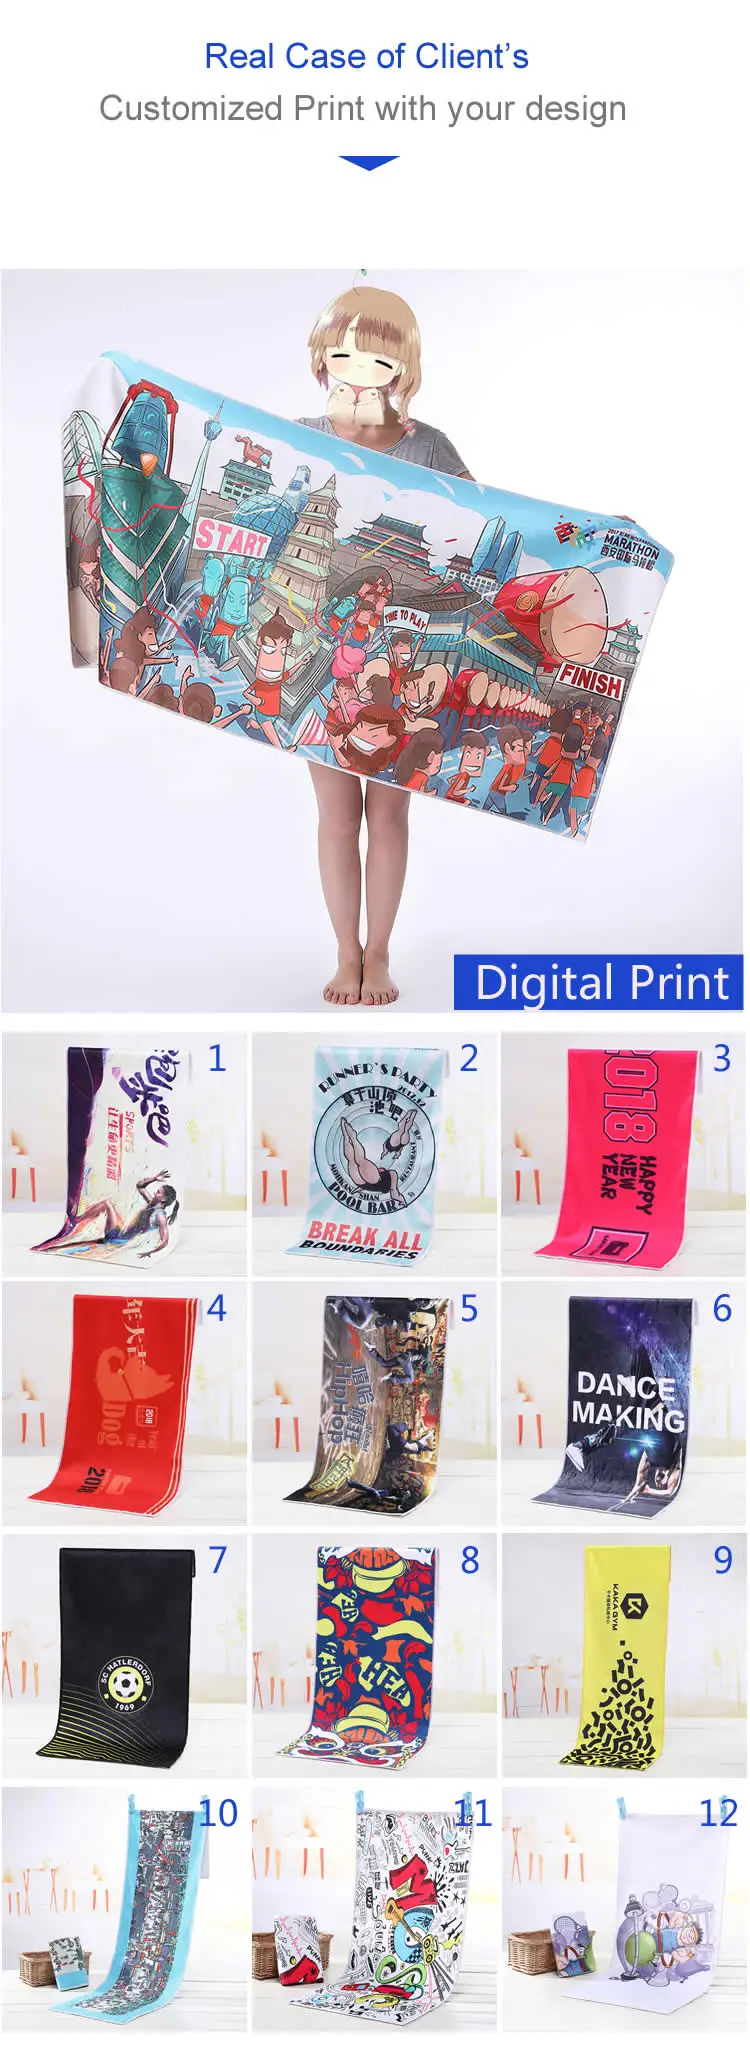 Rept OEM Manufacturer Sand Free Lightweight Custom Double Sides Print Microfiber Recycled Beach Towel